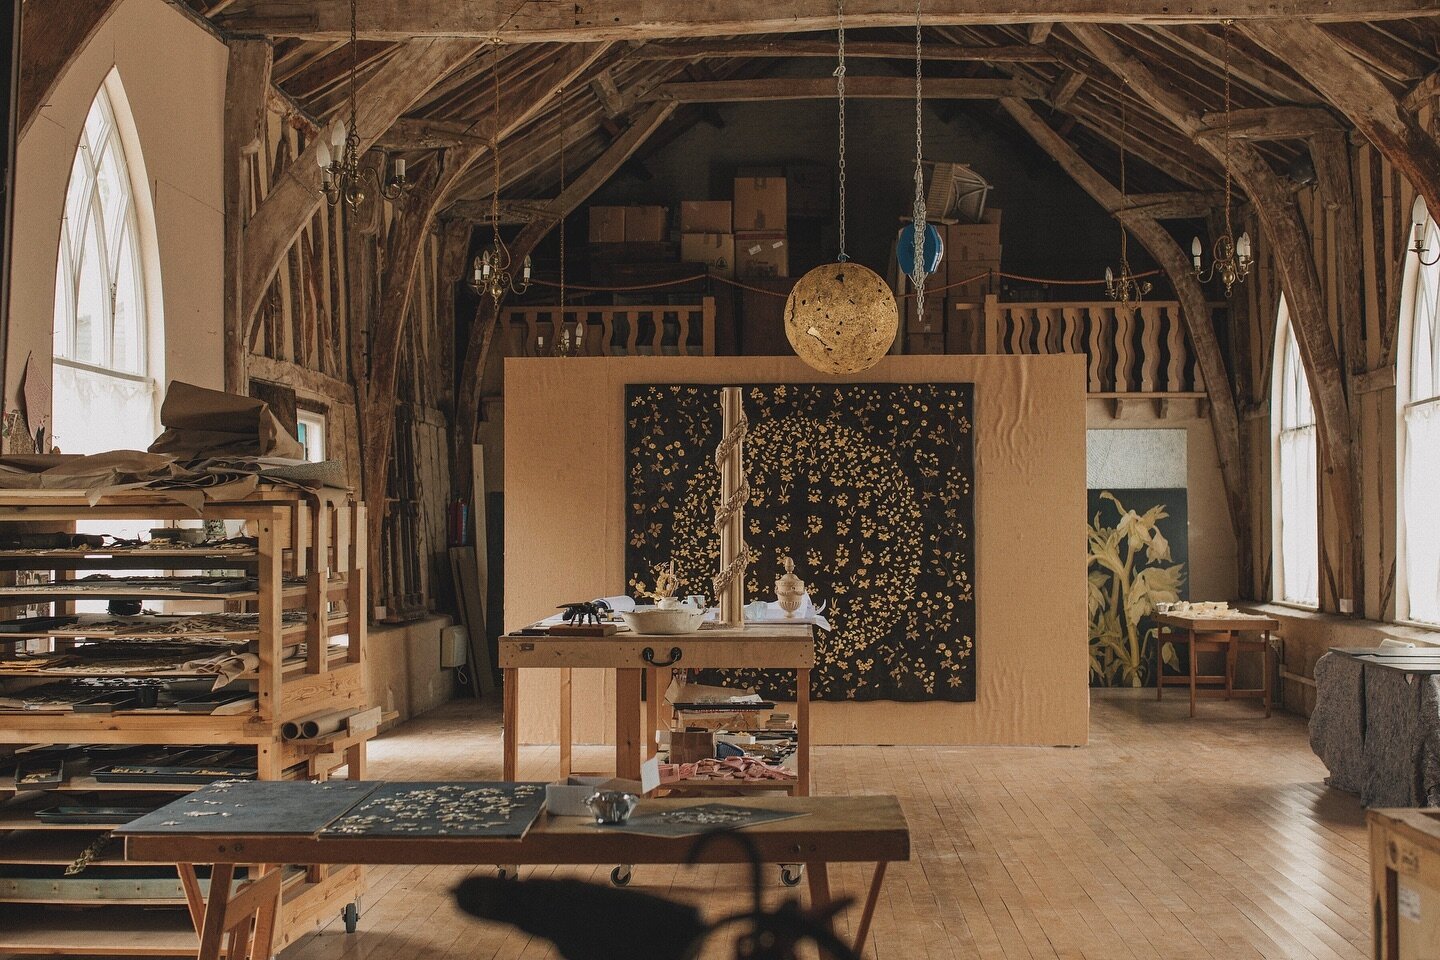 Home sweet home! 
(Reality Disclaimer - rented studio home - I don&rsquo;t live here and my actual home is way smaller and less photogenic)

📷 @maureenme  for the FT - HTSI

#artiststudio